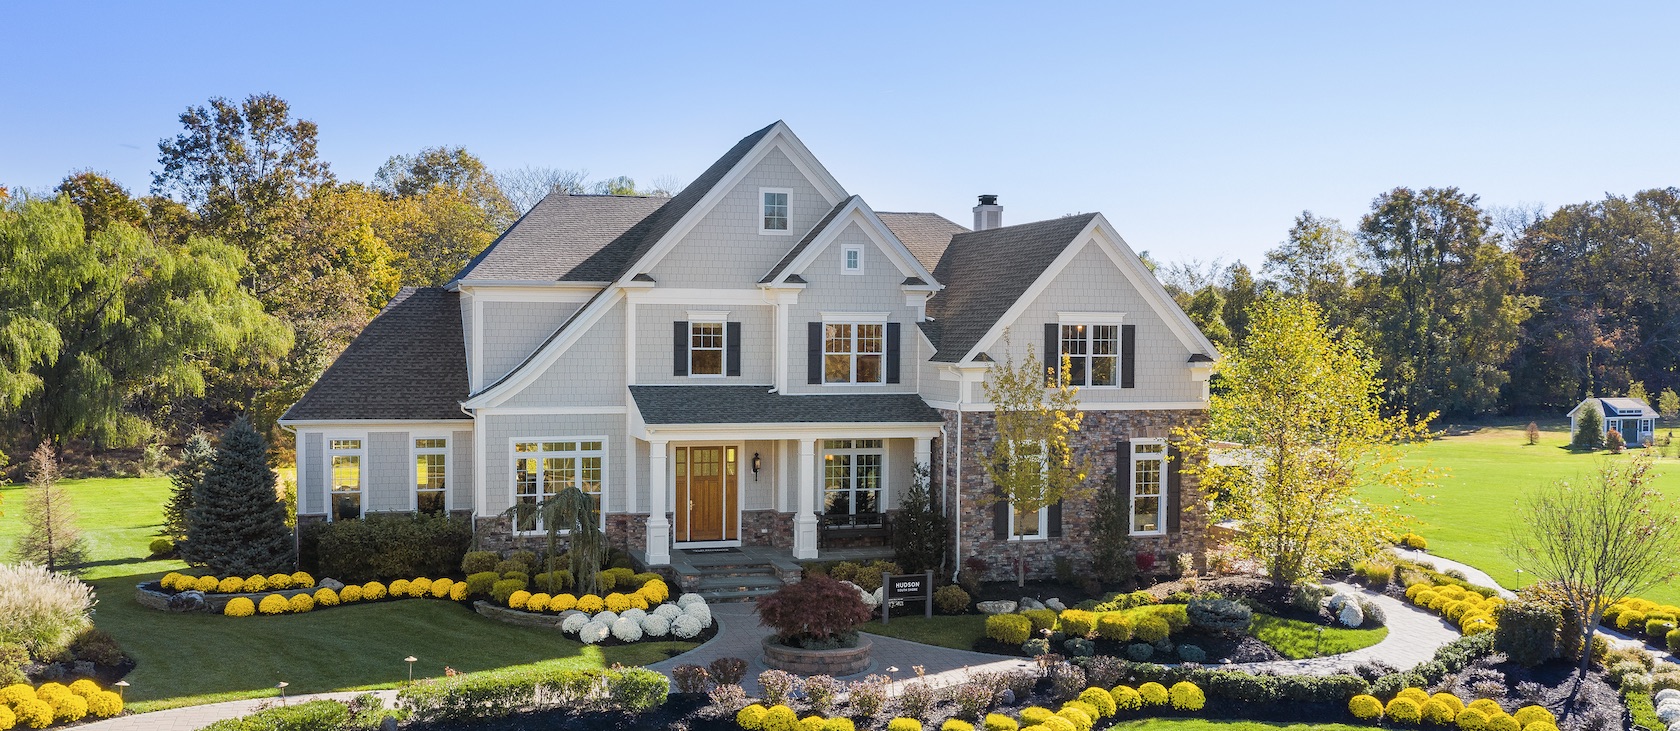 Home exterior with landscaping in New Jersey.